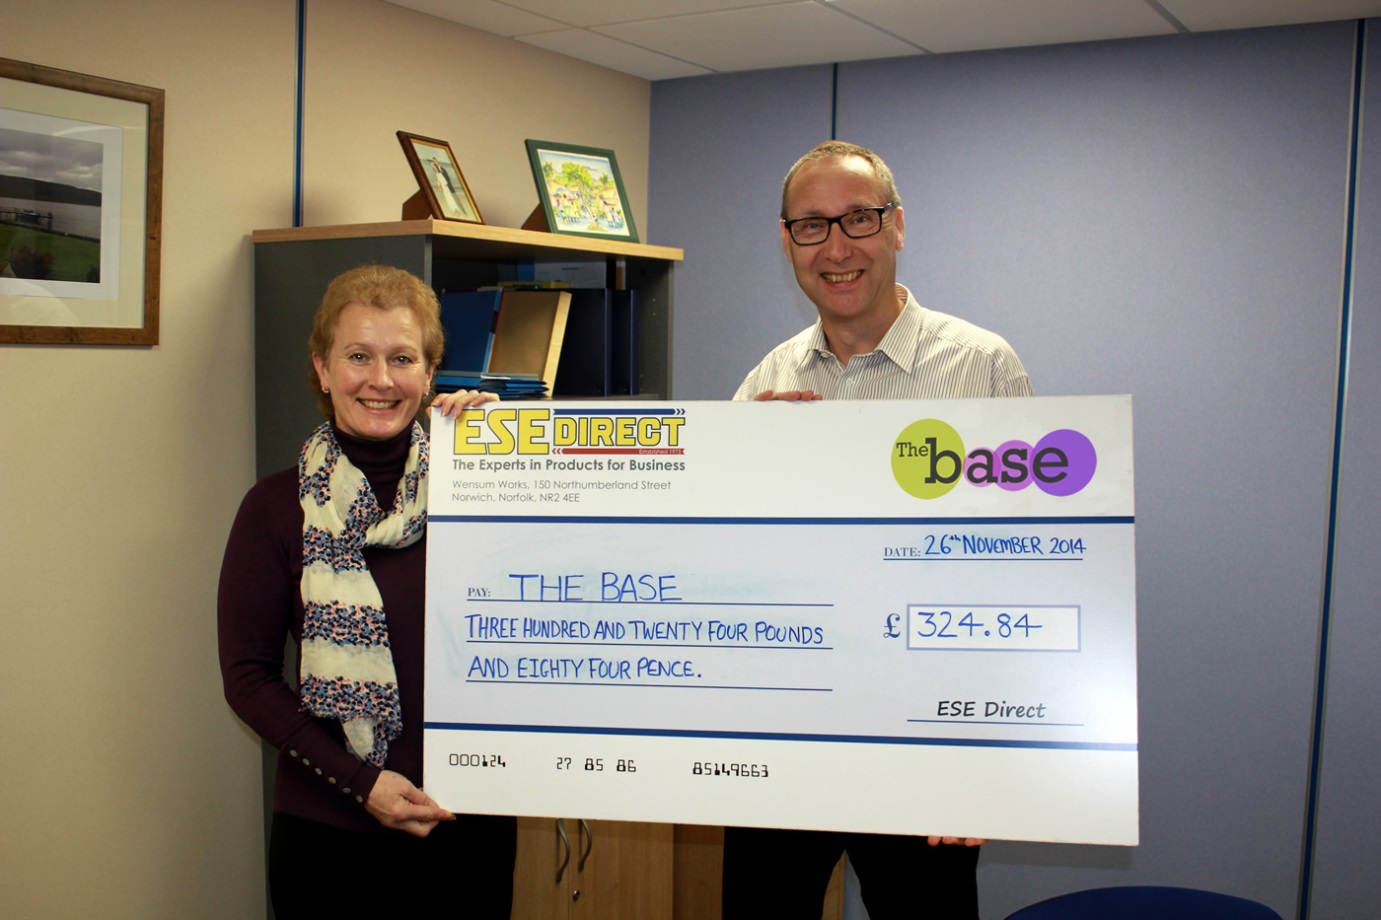 The Base Norwich receive their charity donation from ESE Direct's Mike Wyard